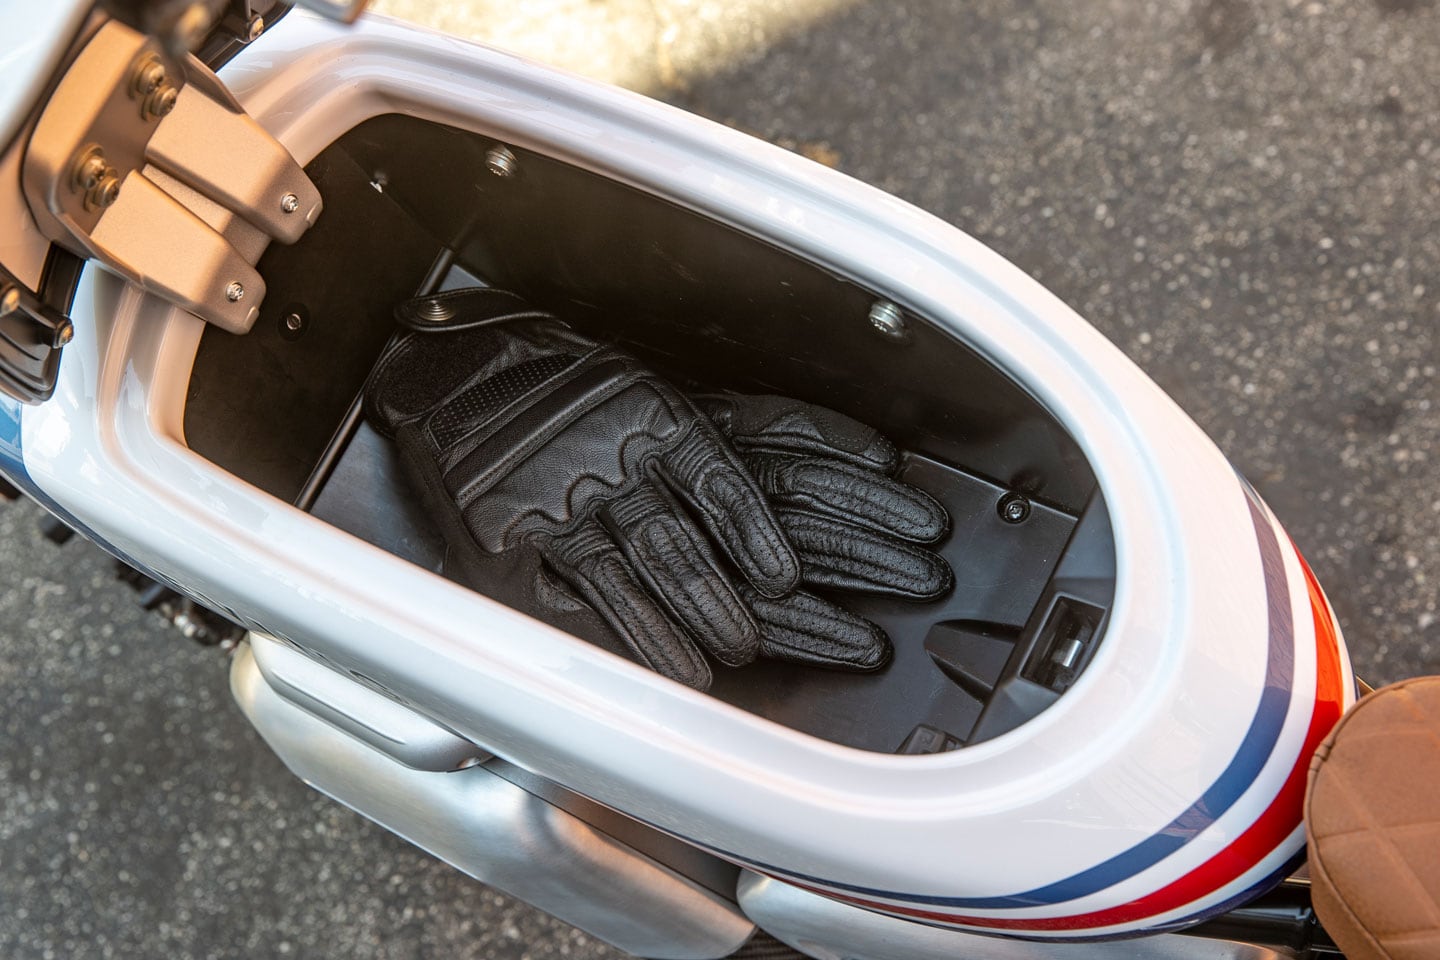 Got storage? The faux tank on the RM1S offers 2.6 gallons of open space for personal items or for carrying the battery charger.